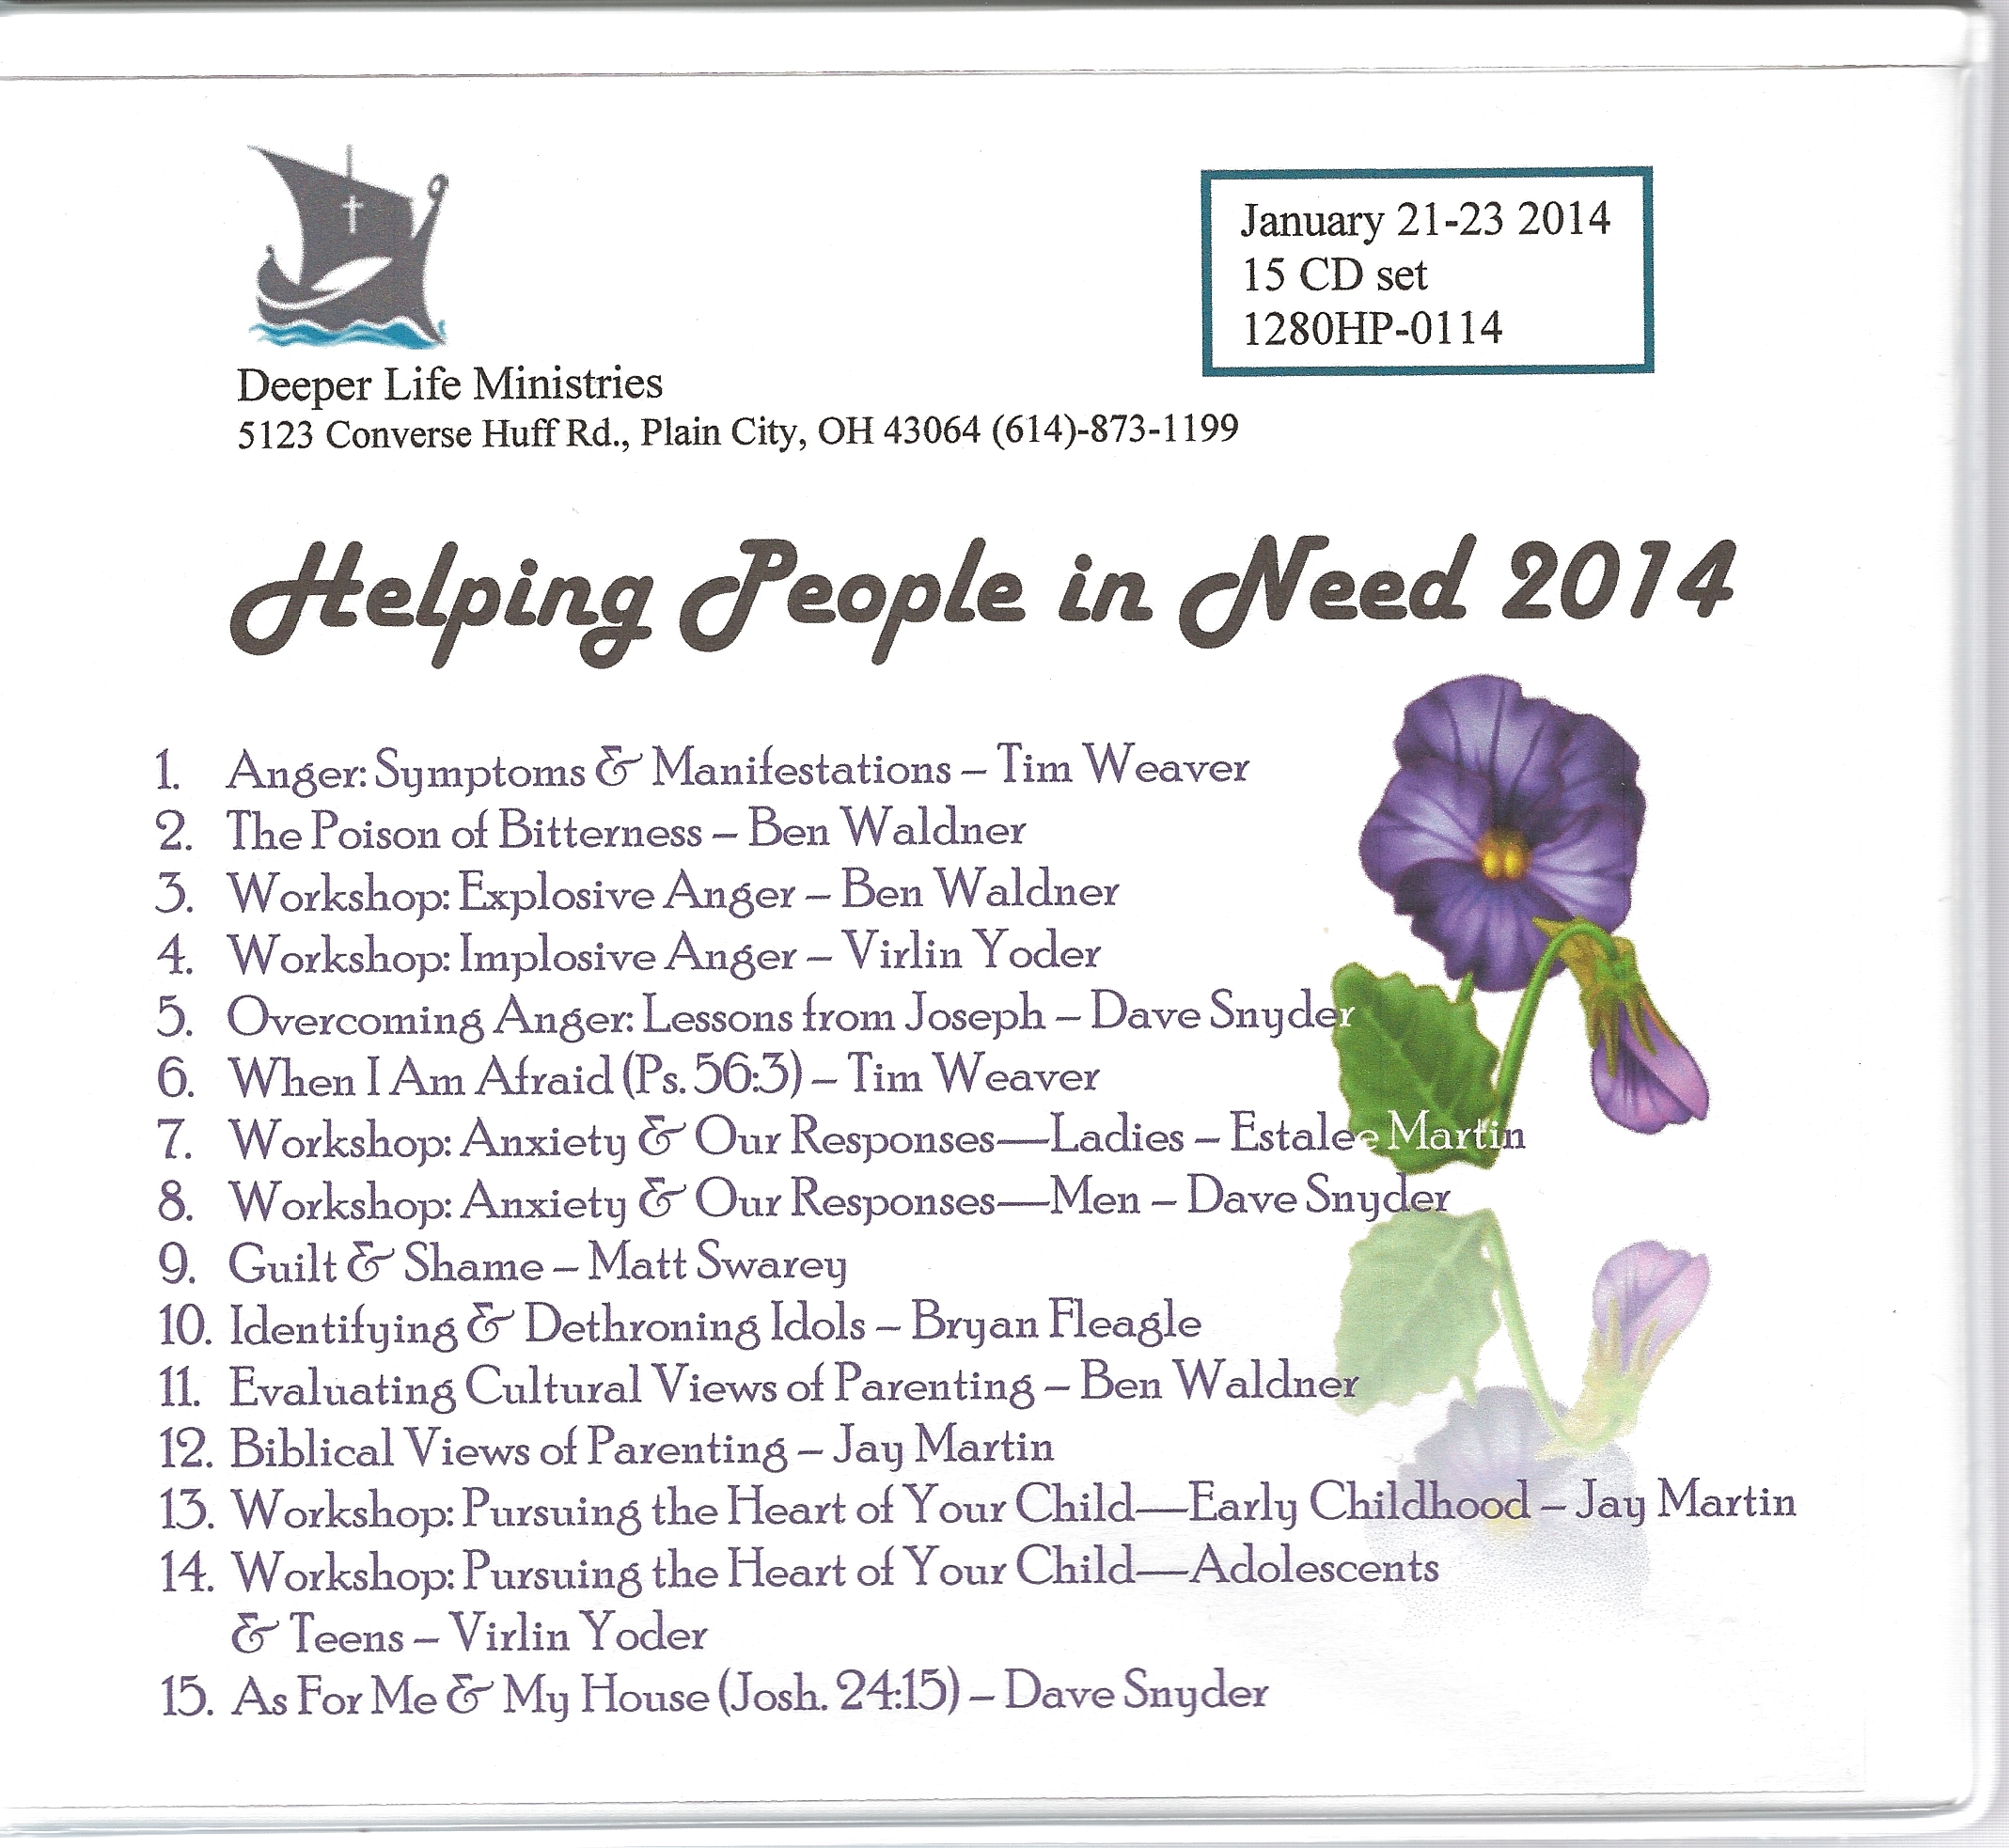 HELPING PEOPLE IN NEED SEMINAR 2014 15 CD Set - Click Image to Close